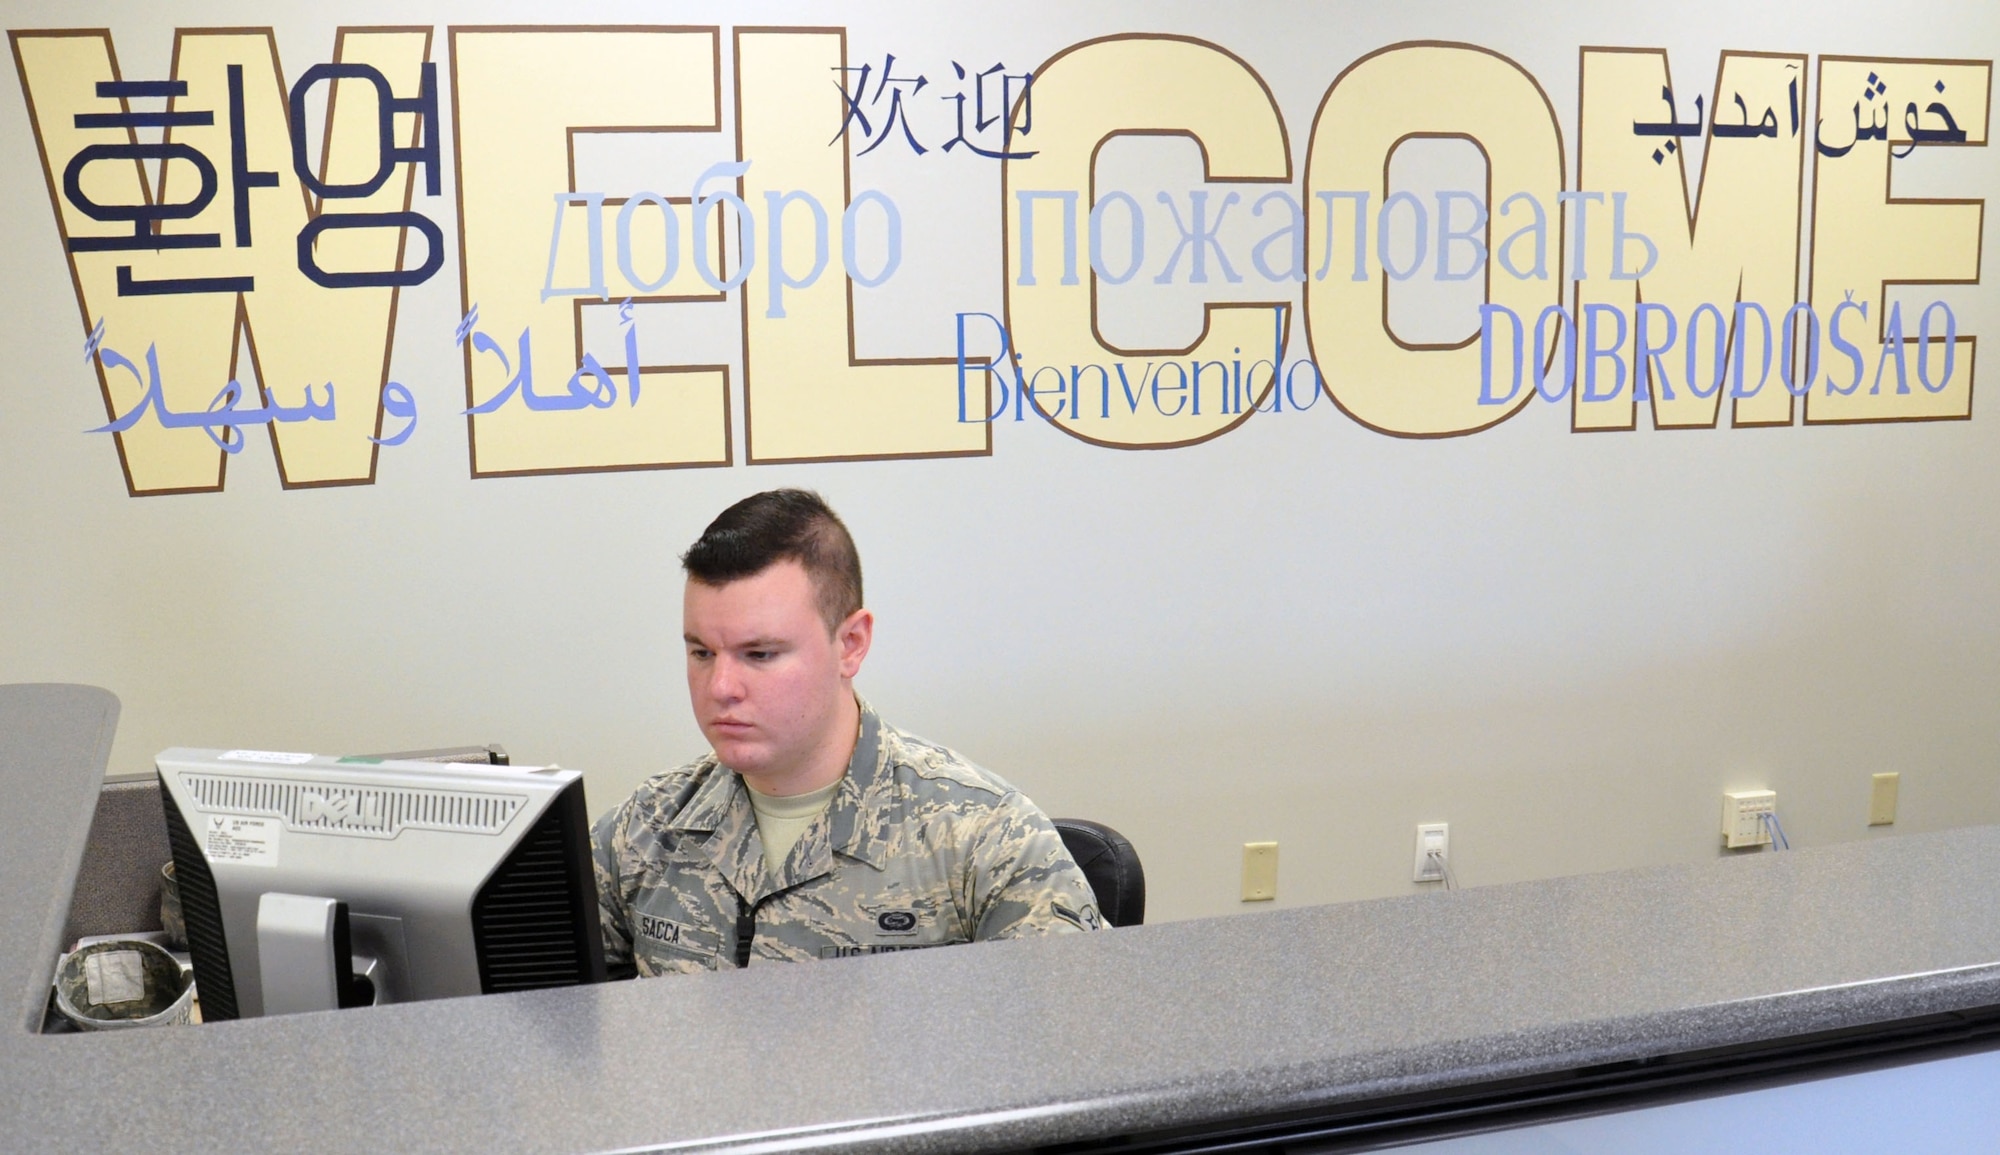 U.S. Air Force Airman Kyle Sacca mans the front desk of the Offutt Language Learning Center Sept. 23. The 55th Wing is home to two LLCs that are vital in the upkeep of linguist training. (U.S. Air Force photo by Staff Sgt. Rachelle Blake)